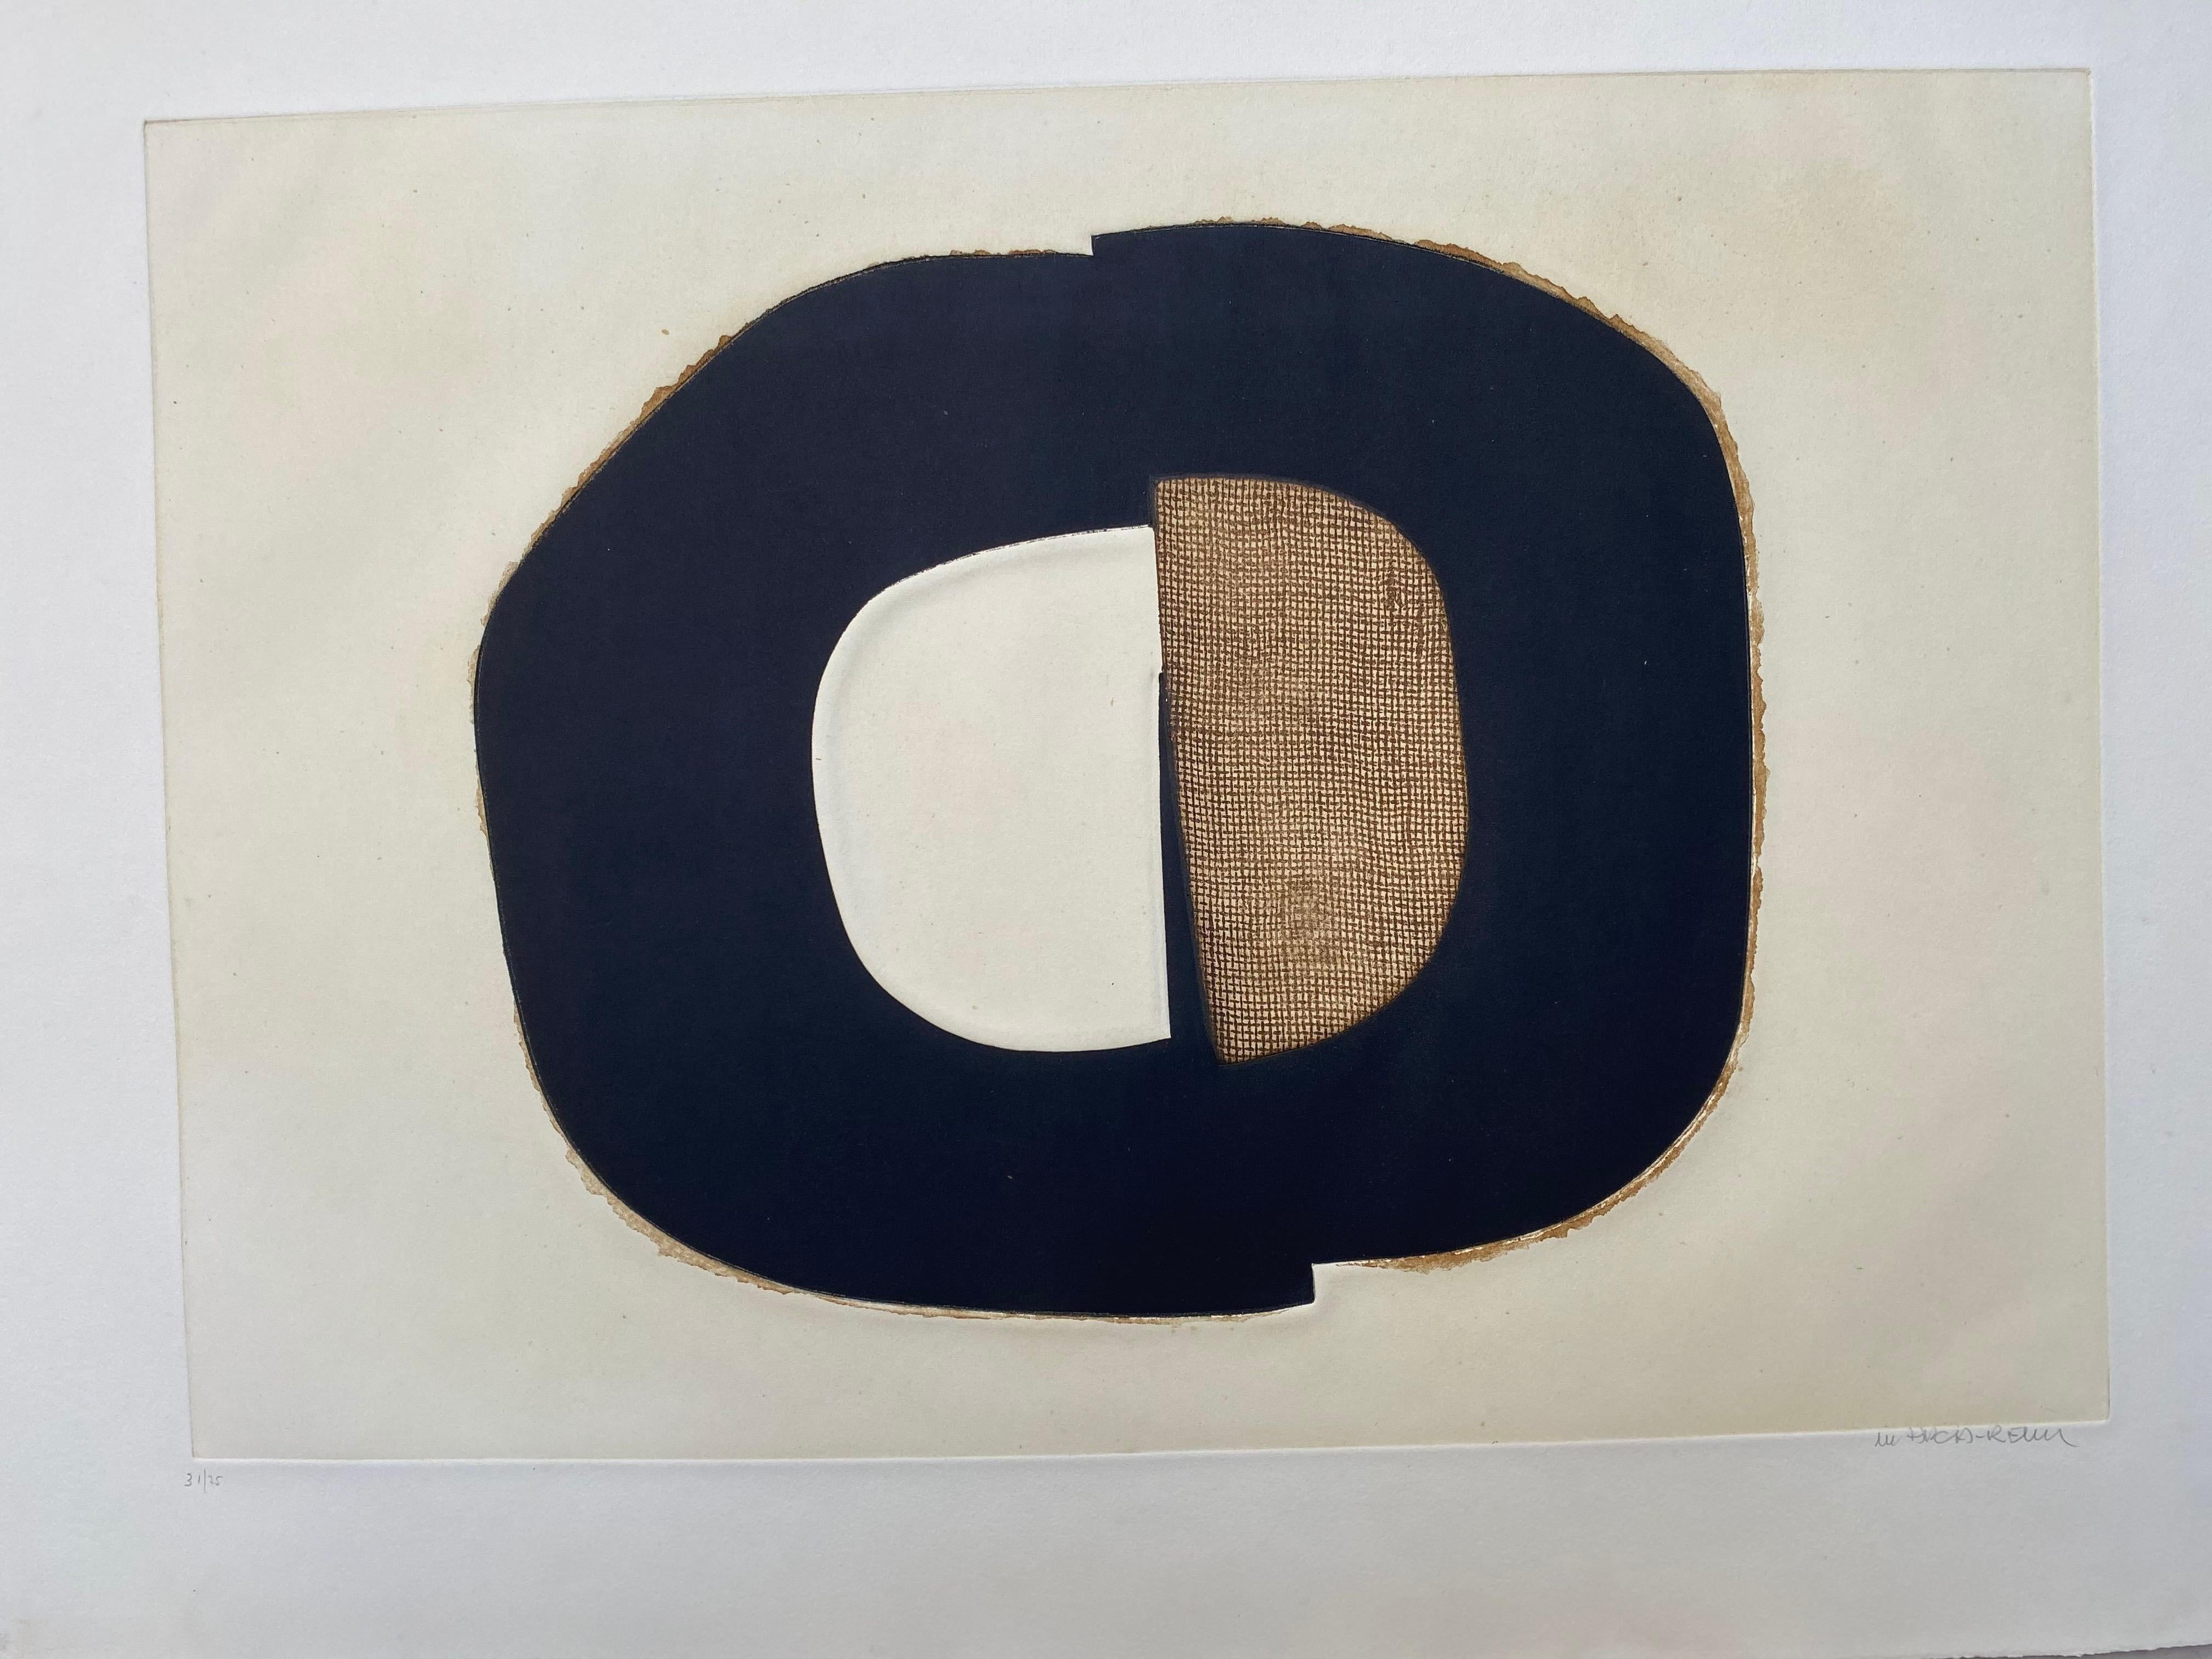 Conrad Marca-Relli

Composition 8
31/75
Mixed media on guarro paper
Poligrafa Edition
Numbered out of 75 and signed in pencil by the artist 
Circa 1977
77 x 56,5 cm
Perfect condition 
1100 euros 